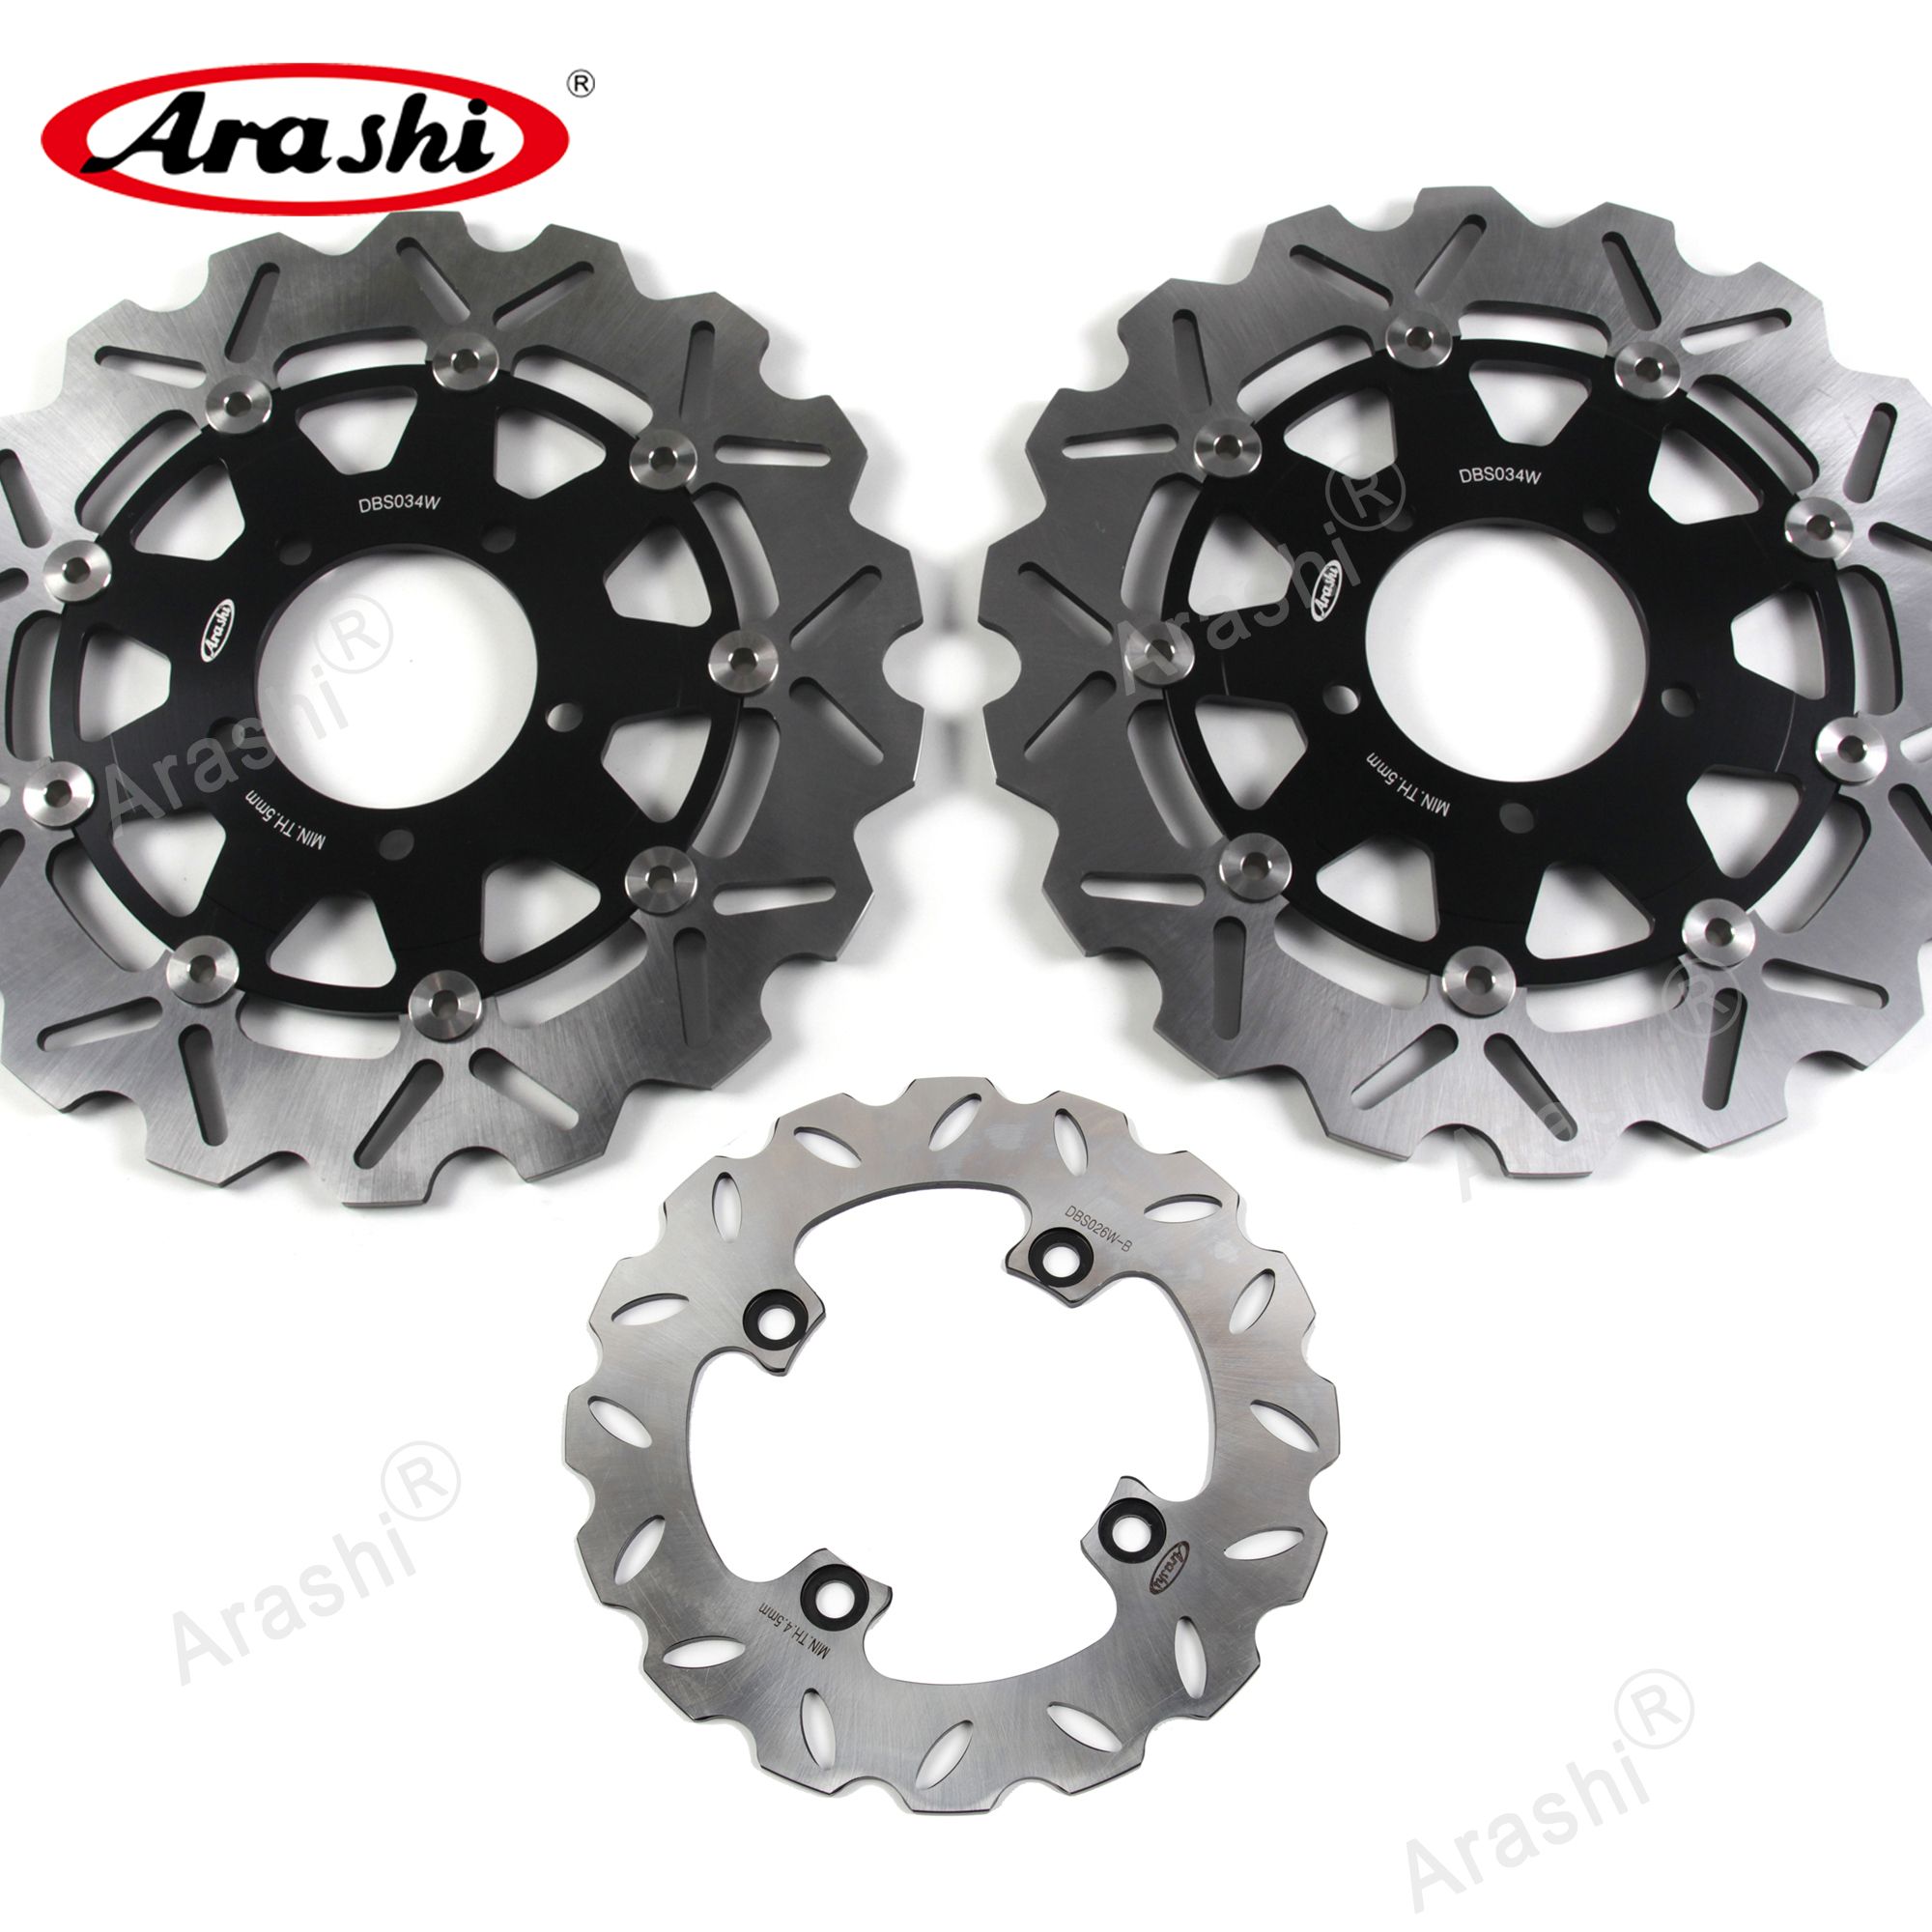 Wholesale For Ninja ZX10R 1000 2004 2005 2006 2007 Front Rear Disk Disc Rotor Kit ZX 10R ZX 10R ZX6R 600 2007 2015 By Arashidh Under $188.72 | DHgate.Com